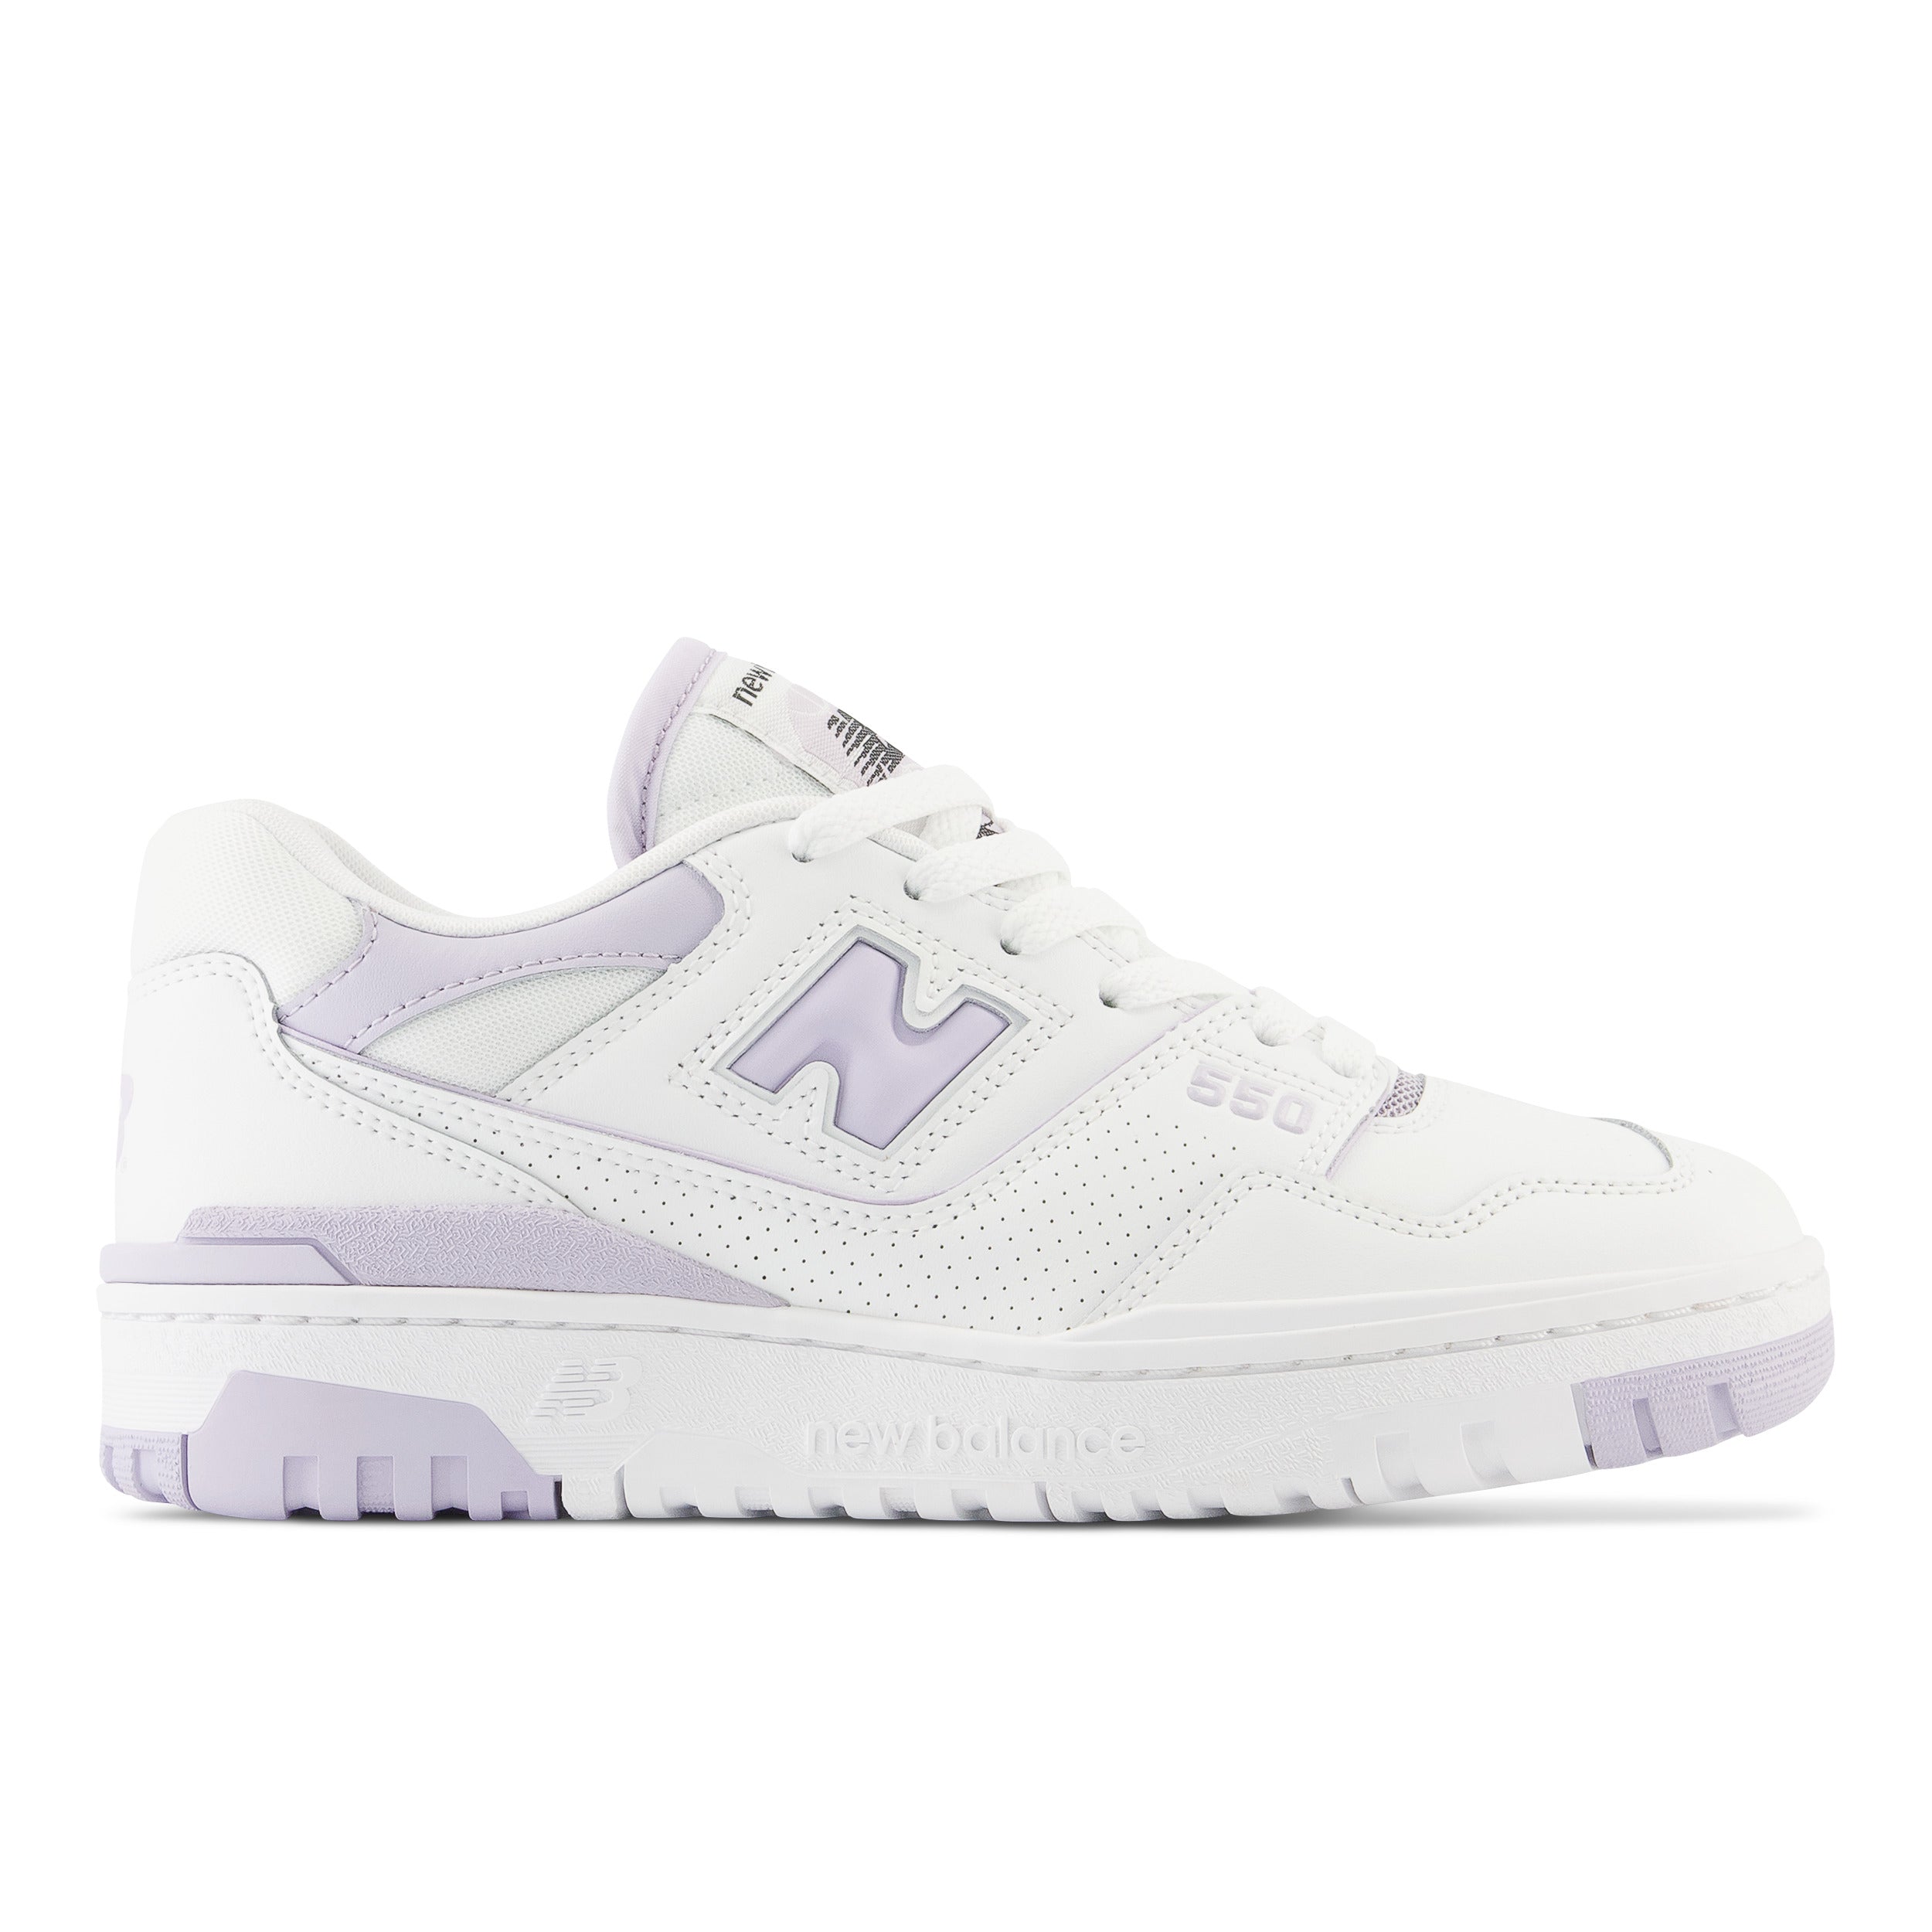 NEW BALANCE-Women's Sneakers 550-White/Grey Violet